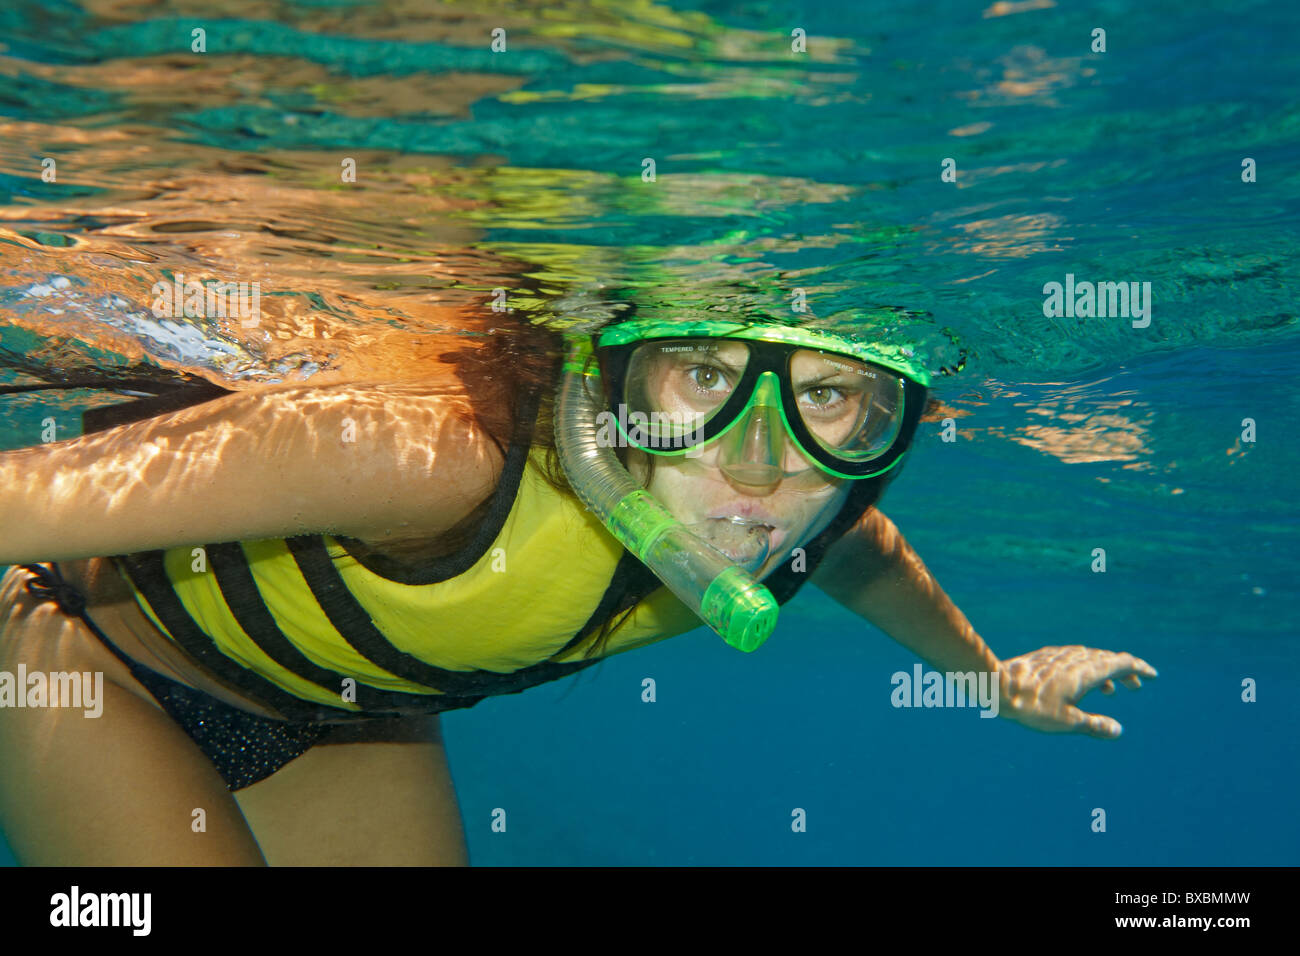 Woman snorkling in Red Sea - yellow life jacket, blue water, green mask Stock Photo